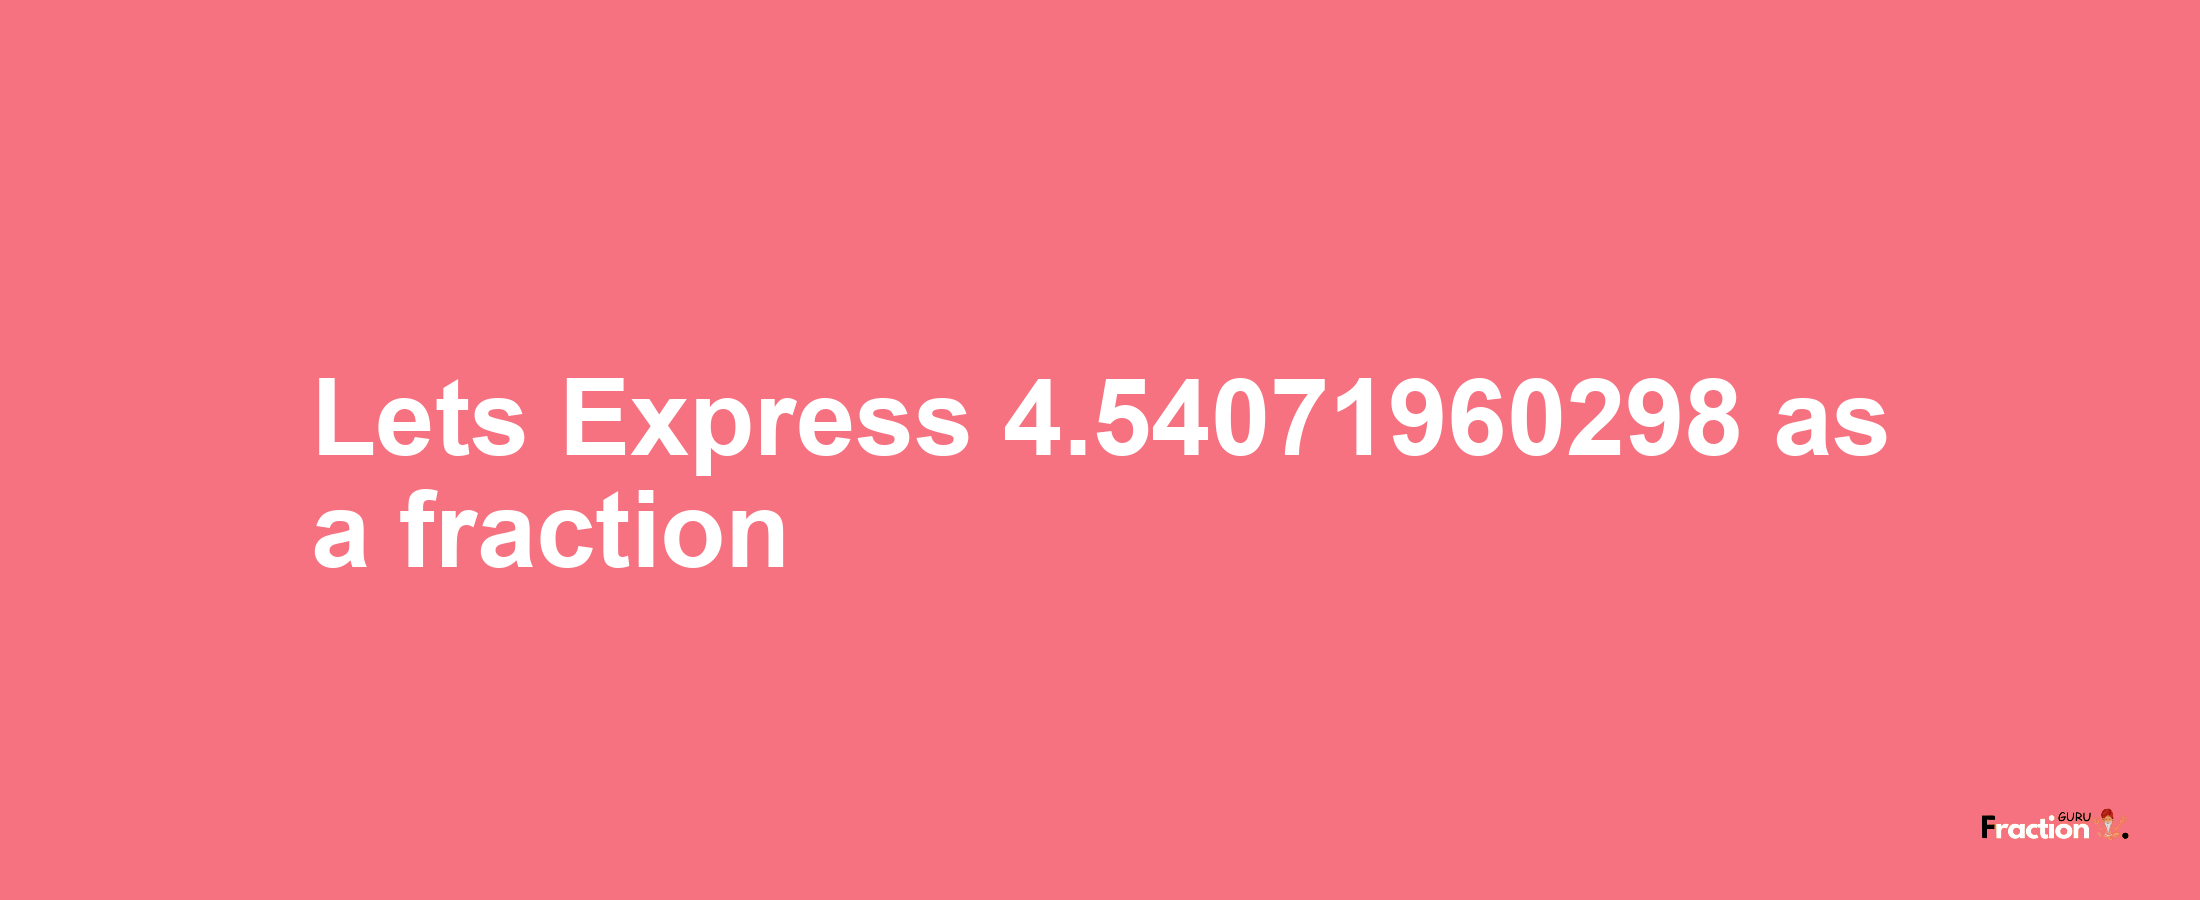 Lets Express 4.54071960298 as afraction